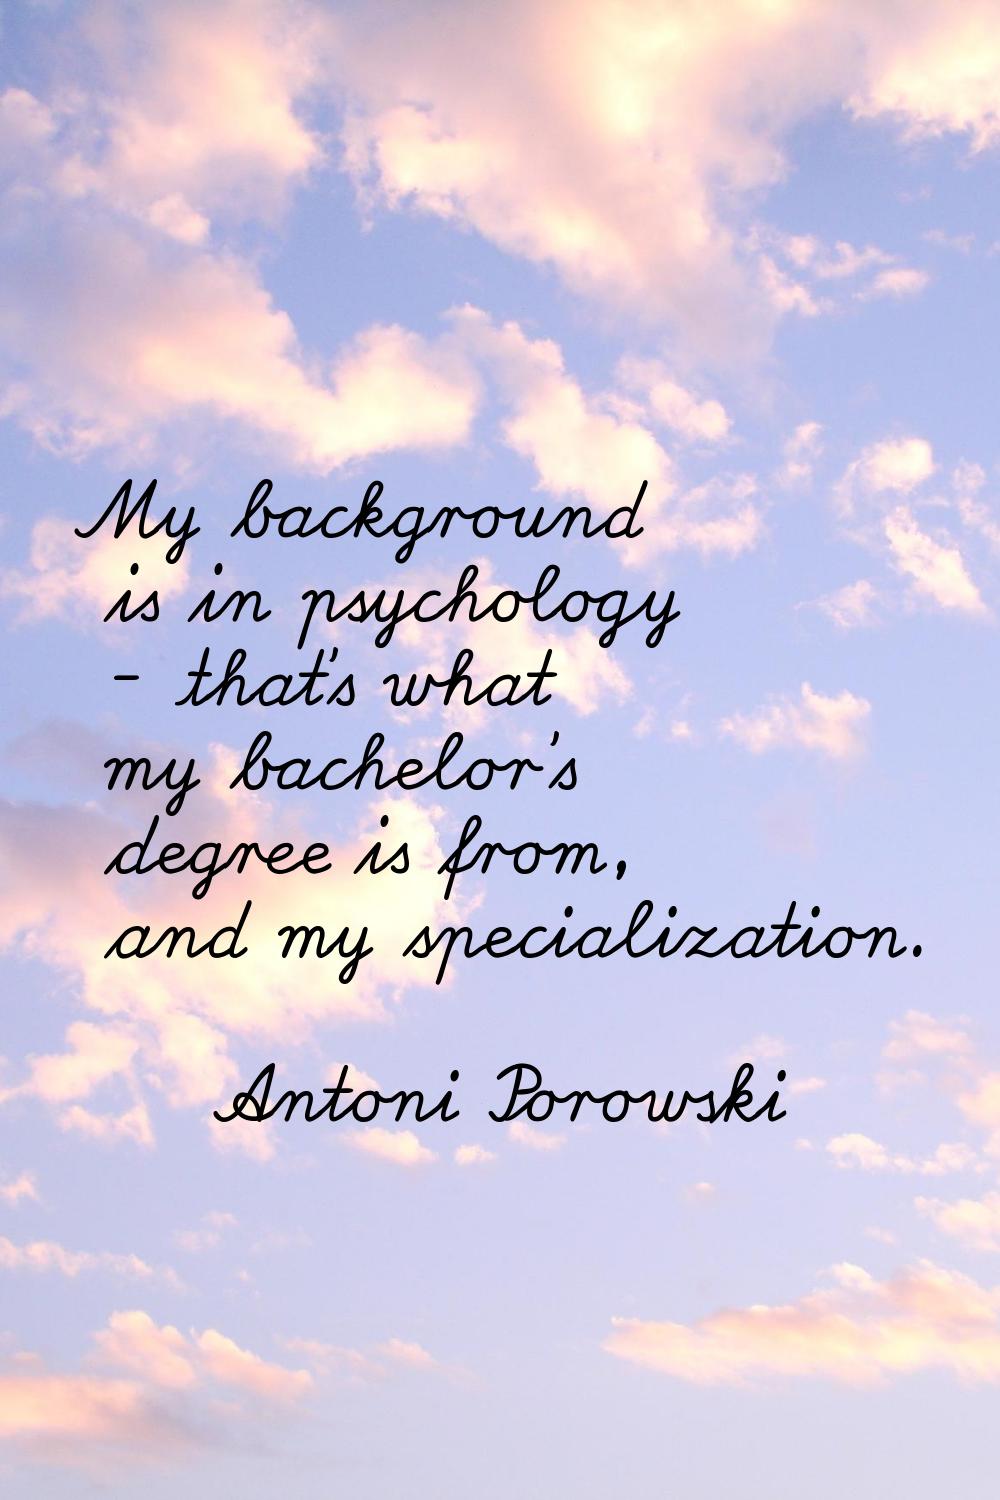 My background is in psychology - that's what my bachelor's degree is from, and my specialization.